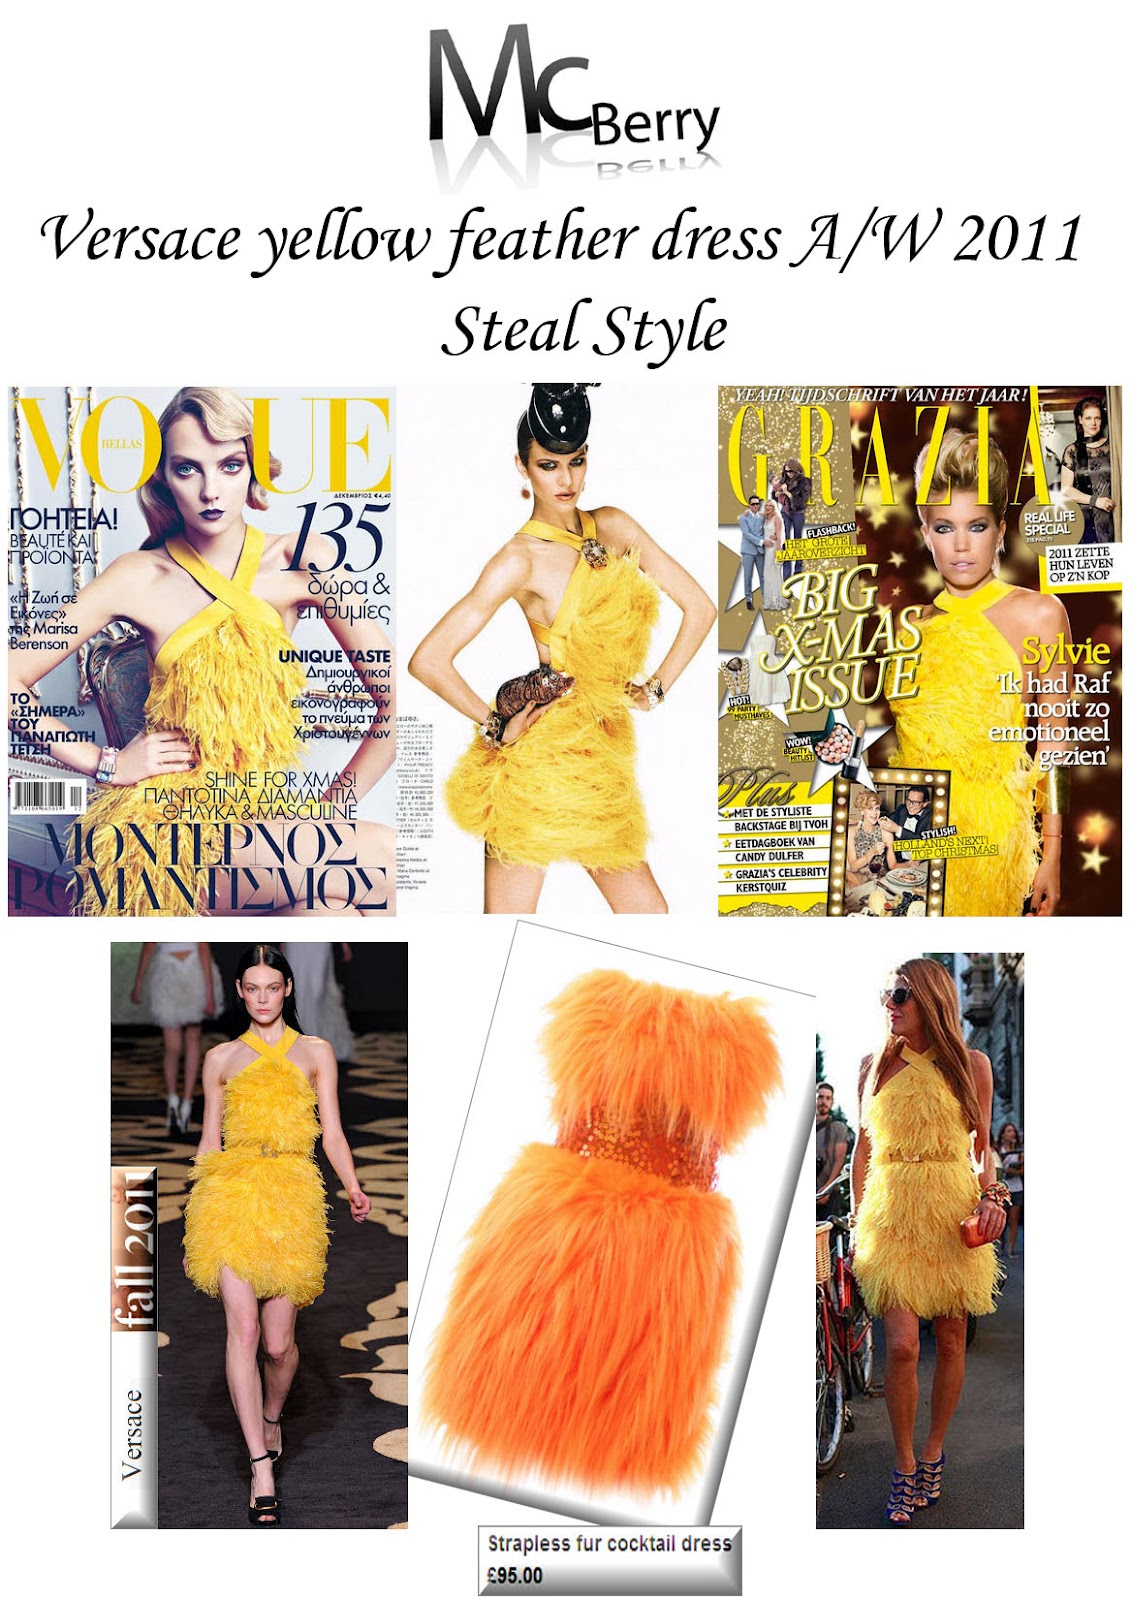 Versace yellow feather dress in Vogue, Grazia and Tatler